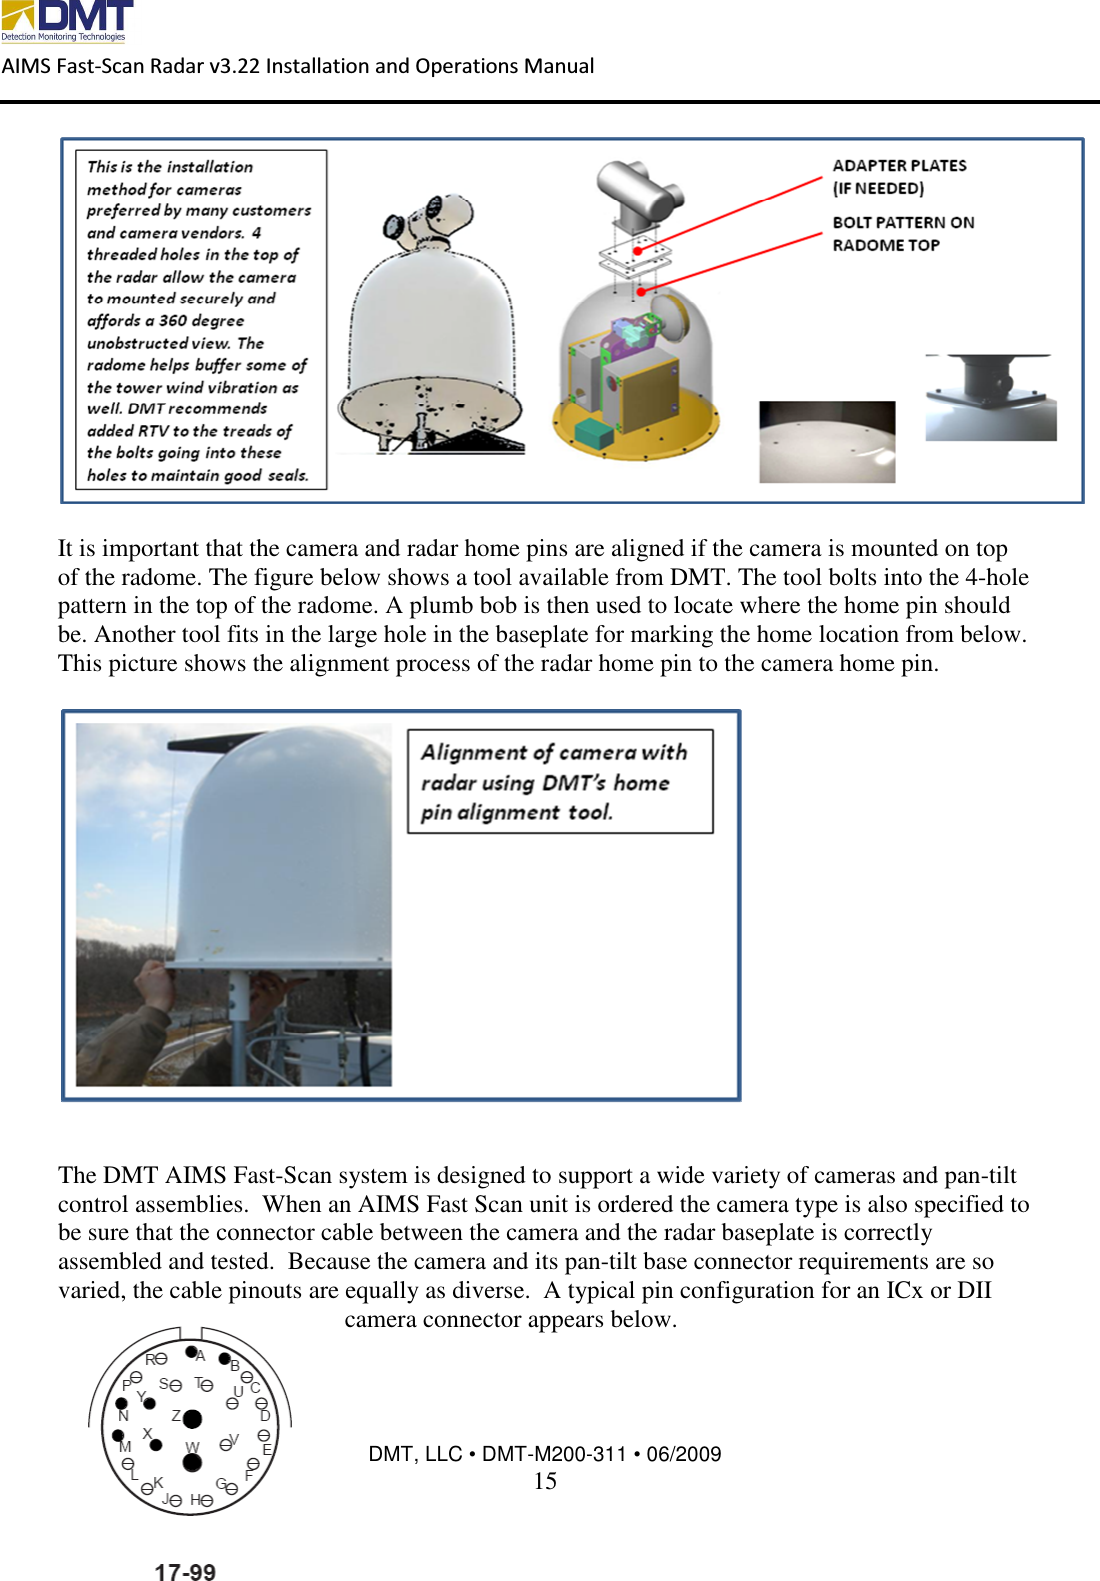  AIMS Fast-Scan Radar v3.22 Installation and Operations Manual    DMT, LLC • DMT-M200-311 • 06/2009 15    It is important that the camera and radar home pins are aligned if the camera is mounted on top of the radome. The figure below shows a tool available from DMT. The tool bolts into the 4-hole pattern in the top of the radome. A plumb bob is then used to locate where the home pin should be. Another tool fits in the large hole in the baseplate for marking the home location from below.  This picture shows the alignment process of the radar home pin to the camera home pin.     The DMT AIMS Fast-Scan system is designed to support a wide variety of cameras and pan-tilt control assemblies.  When an AIMS Fast Scan unit is ordered the camera type is also specified to be sure that the connector cable between the camera and the radar baseplate is correctly assembled and tested.  Because the camera and its pan-tilt base connector requirements are so varied, the cable pinouts are equally as diverse.  A typical pin configuration for an ICx or DII camera connector appears below.   